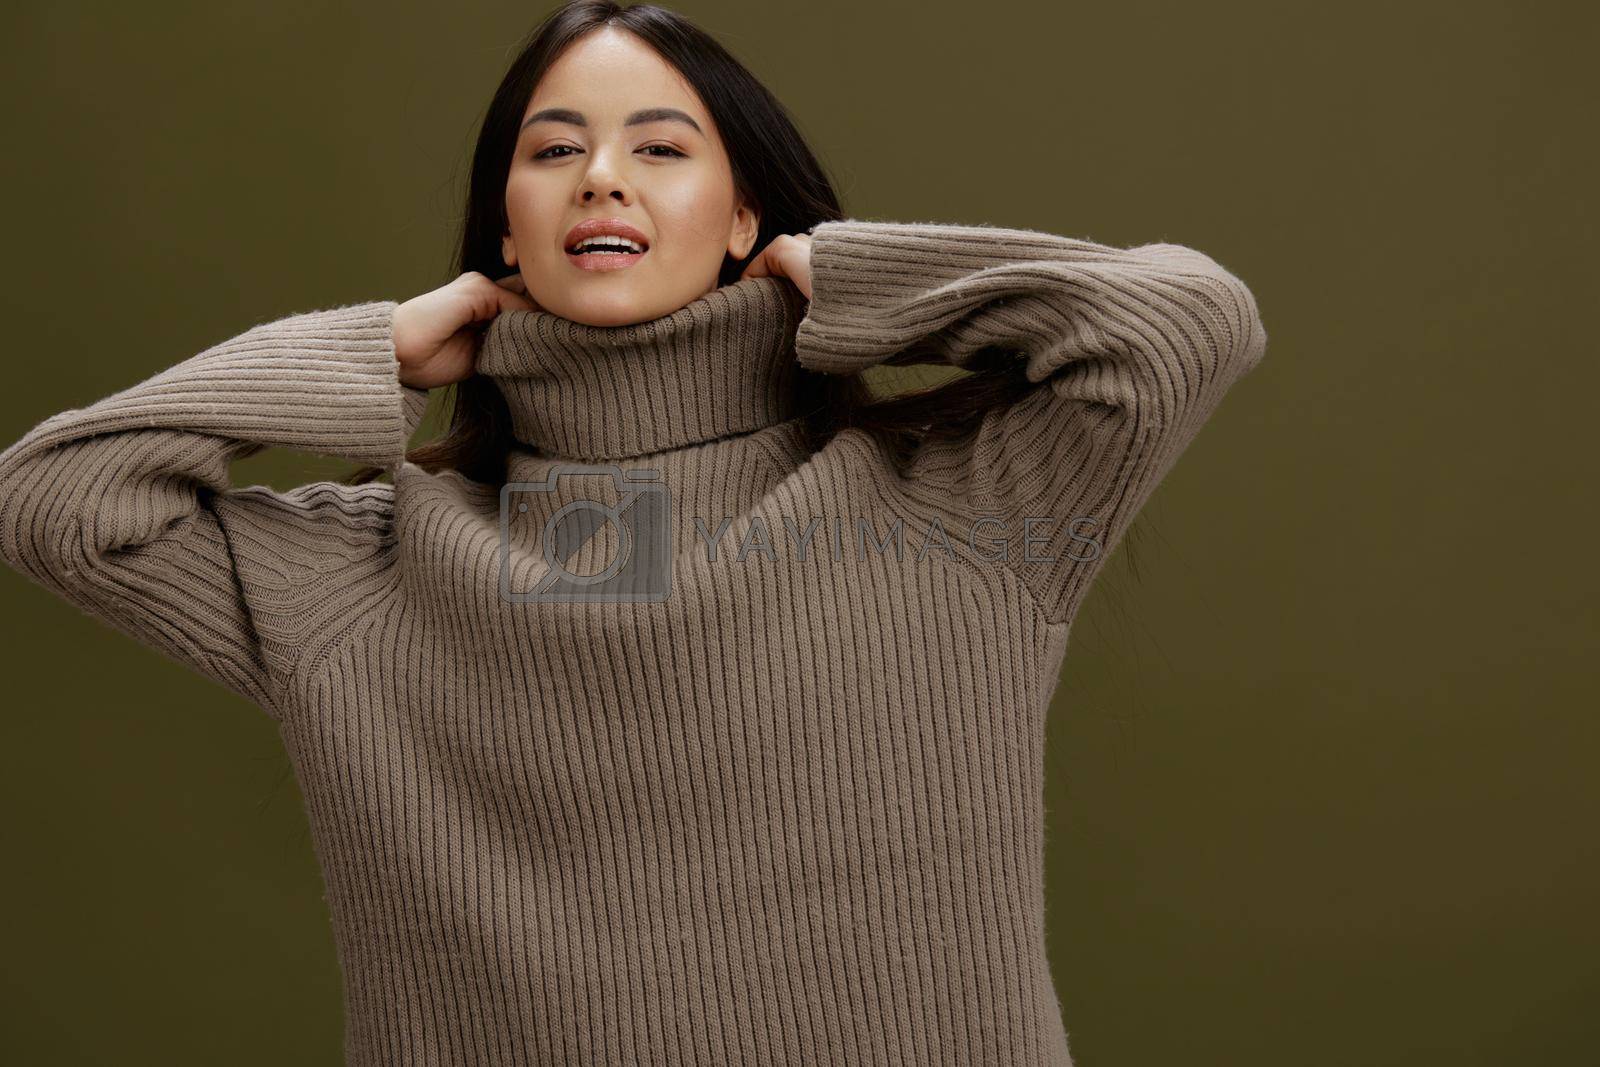 pretty woman in a sweater posing smile clothing fashion studio model. High quality photo